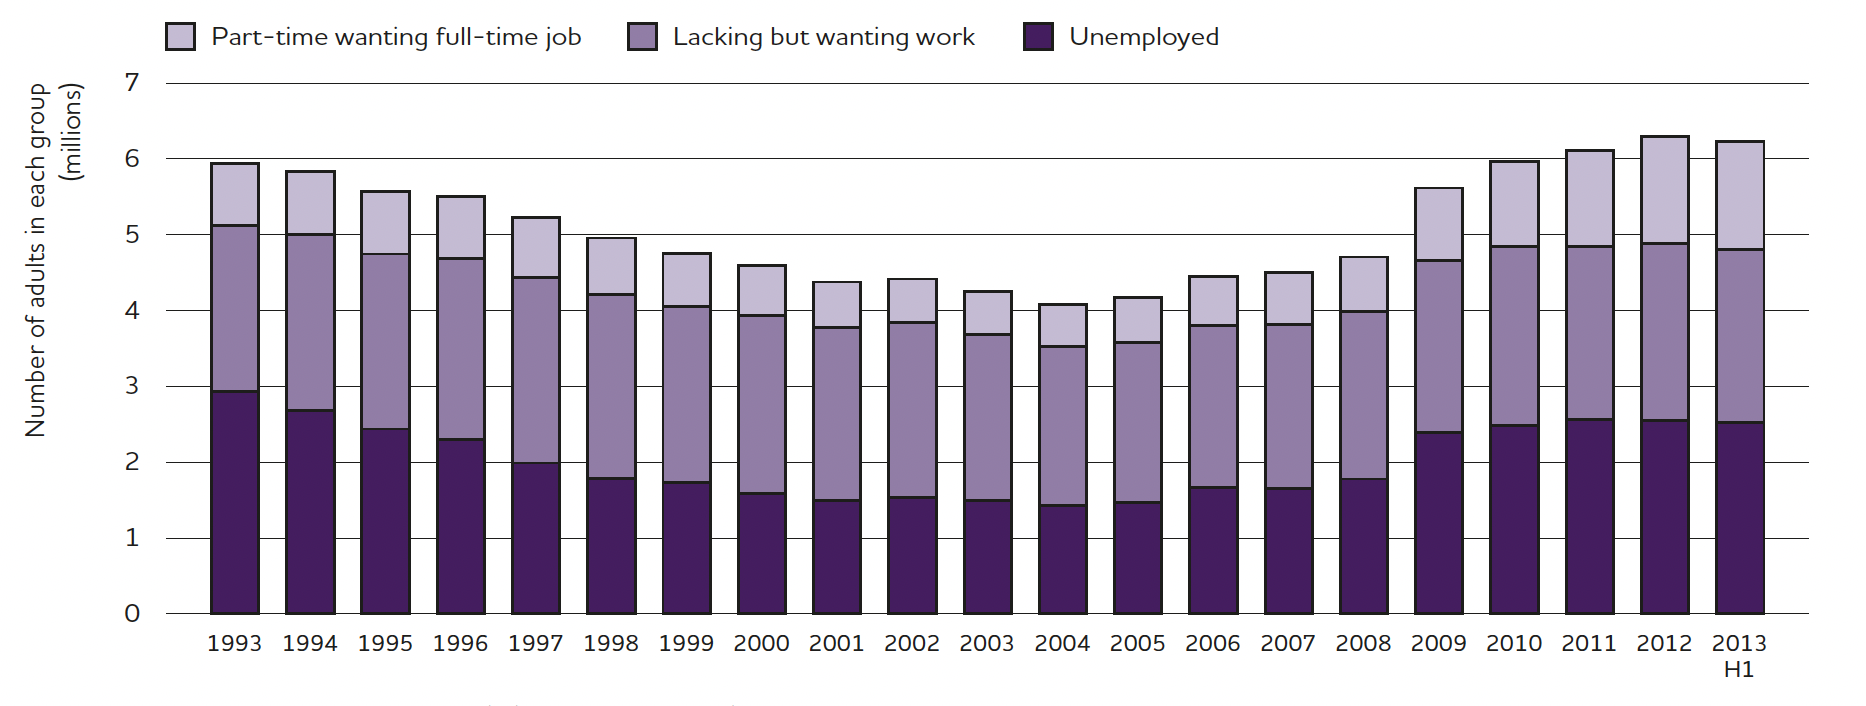 Chart showing underempoyment over time.